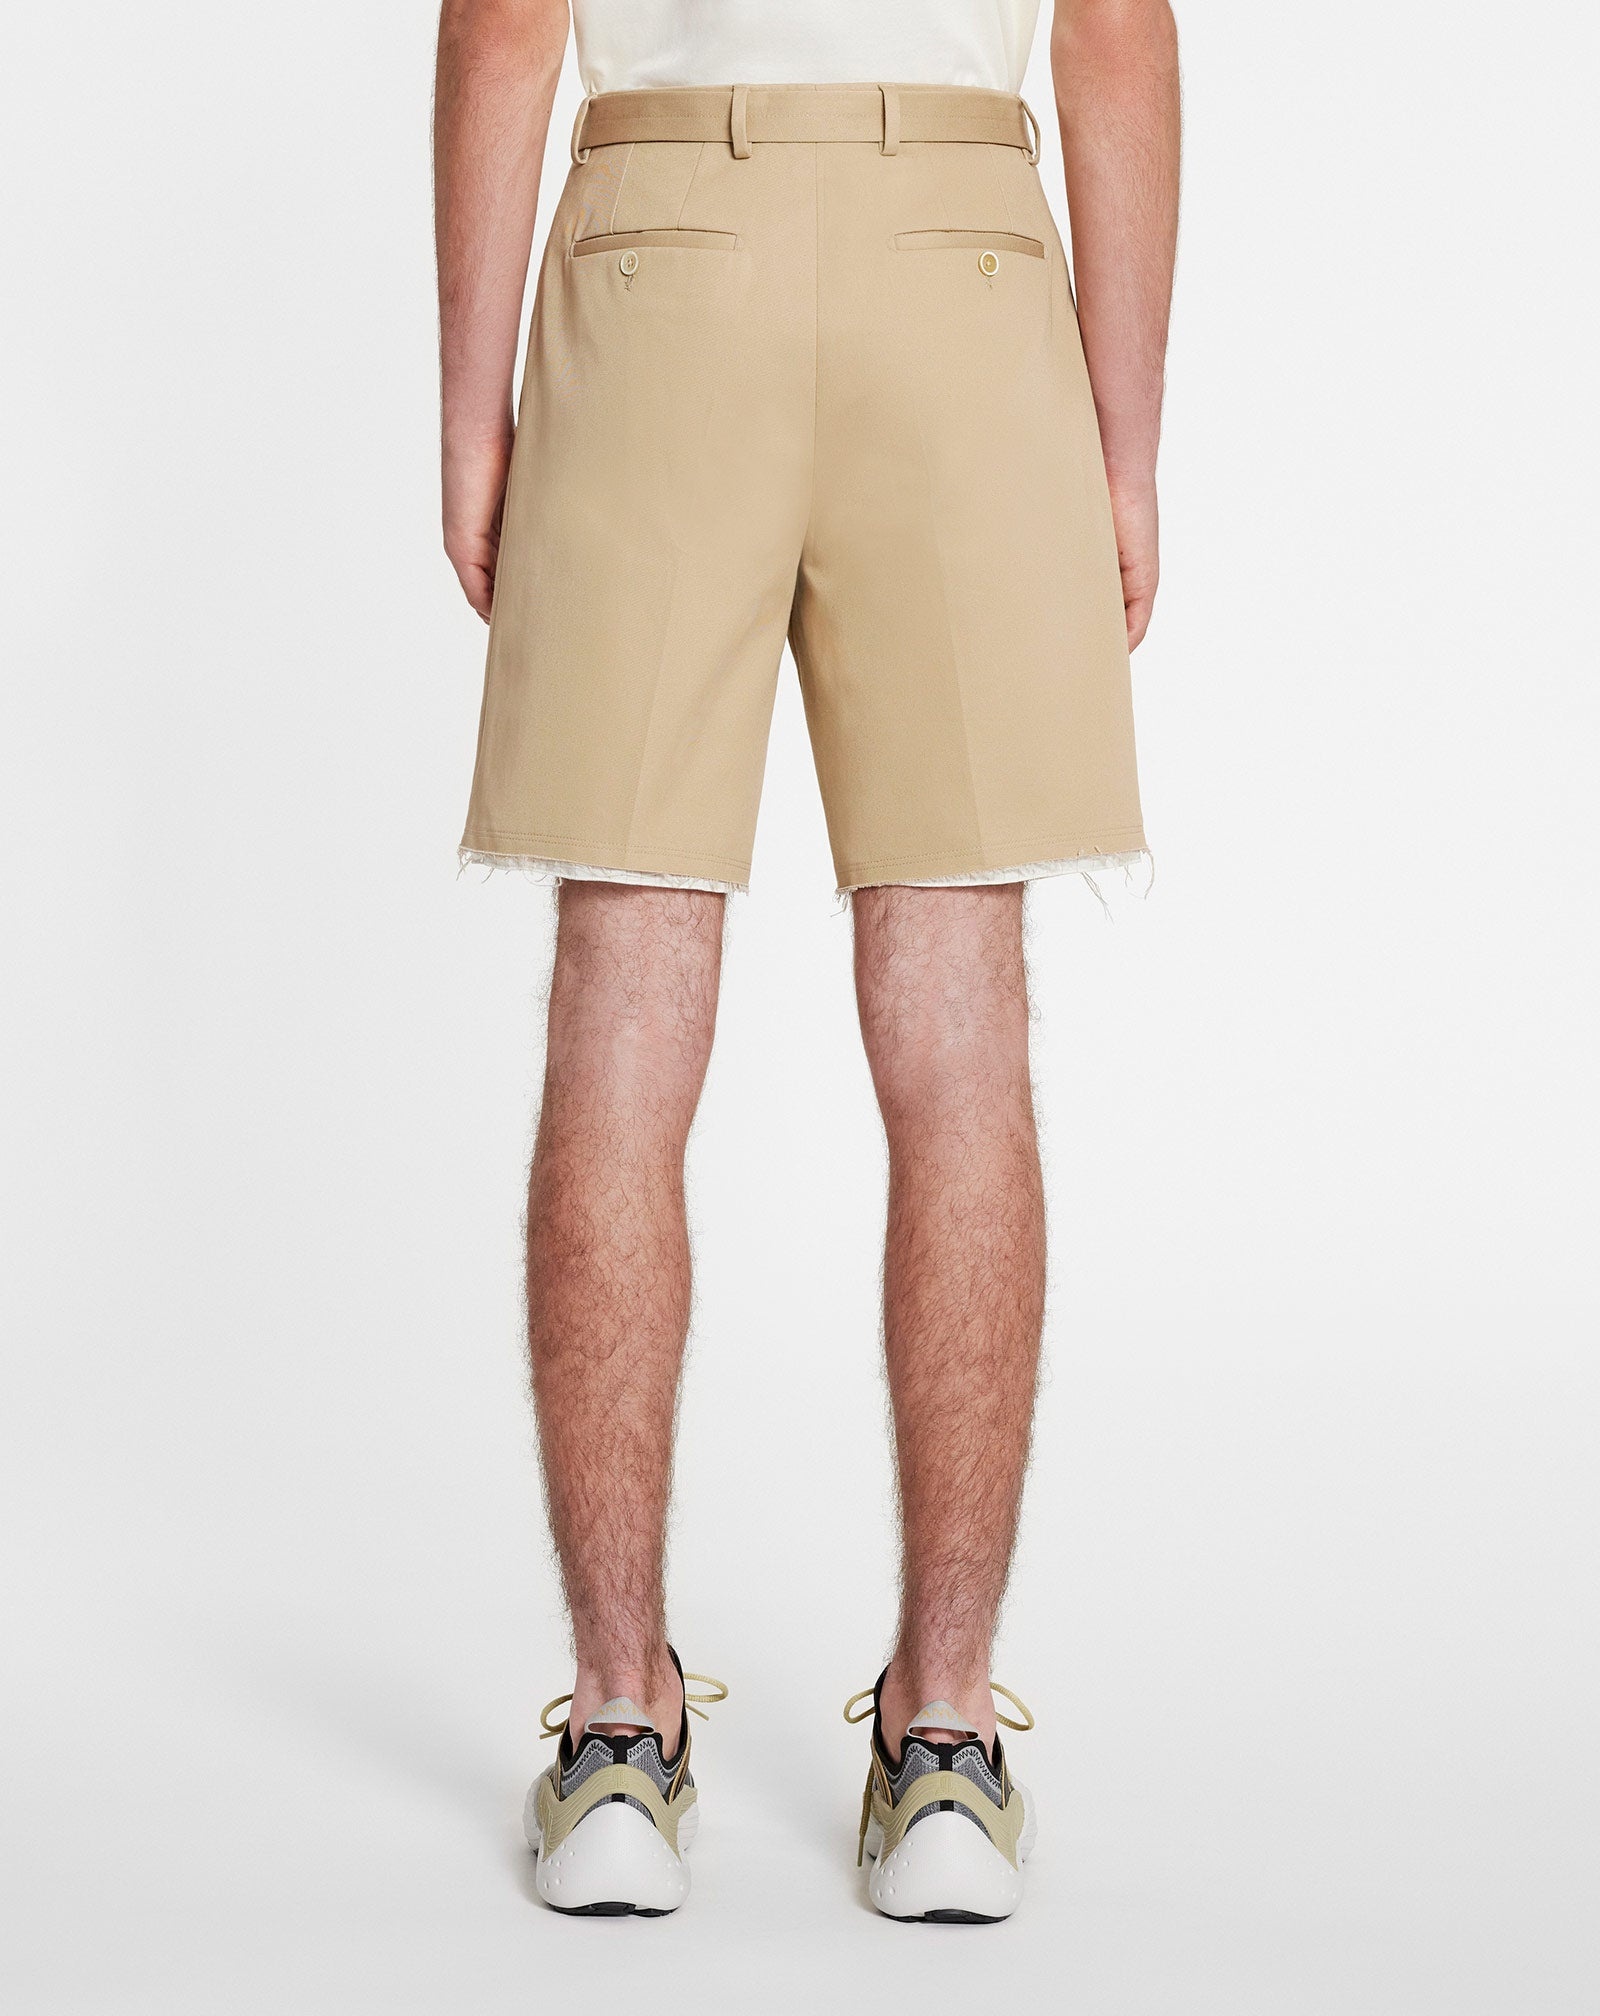 TAILORED SHORTS WITH RAW HEM DETAILS - 4